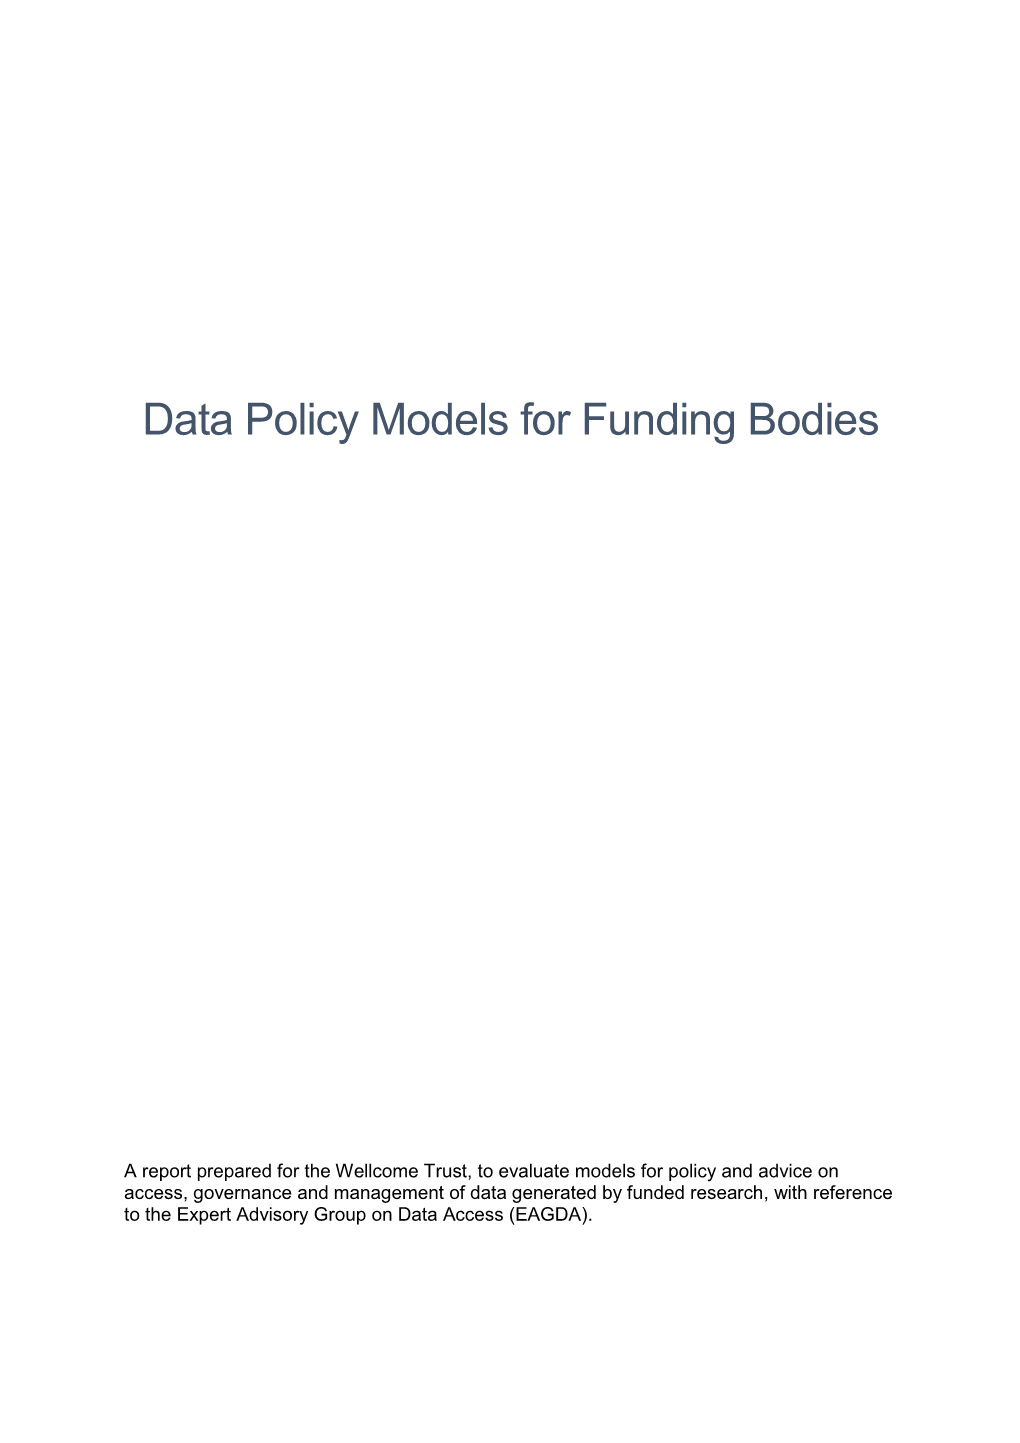 Data Policy Models for Funding Bodies